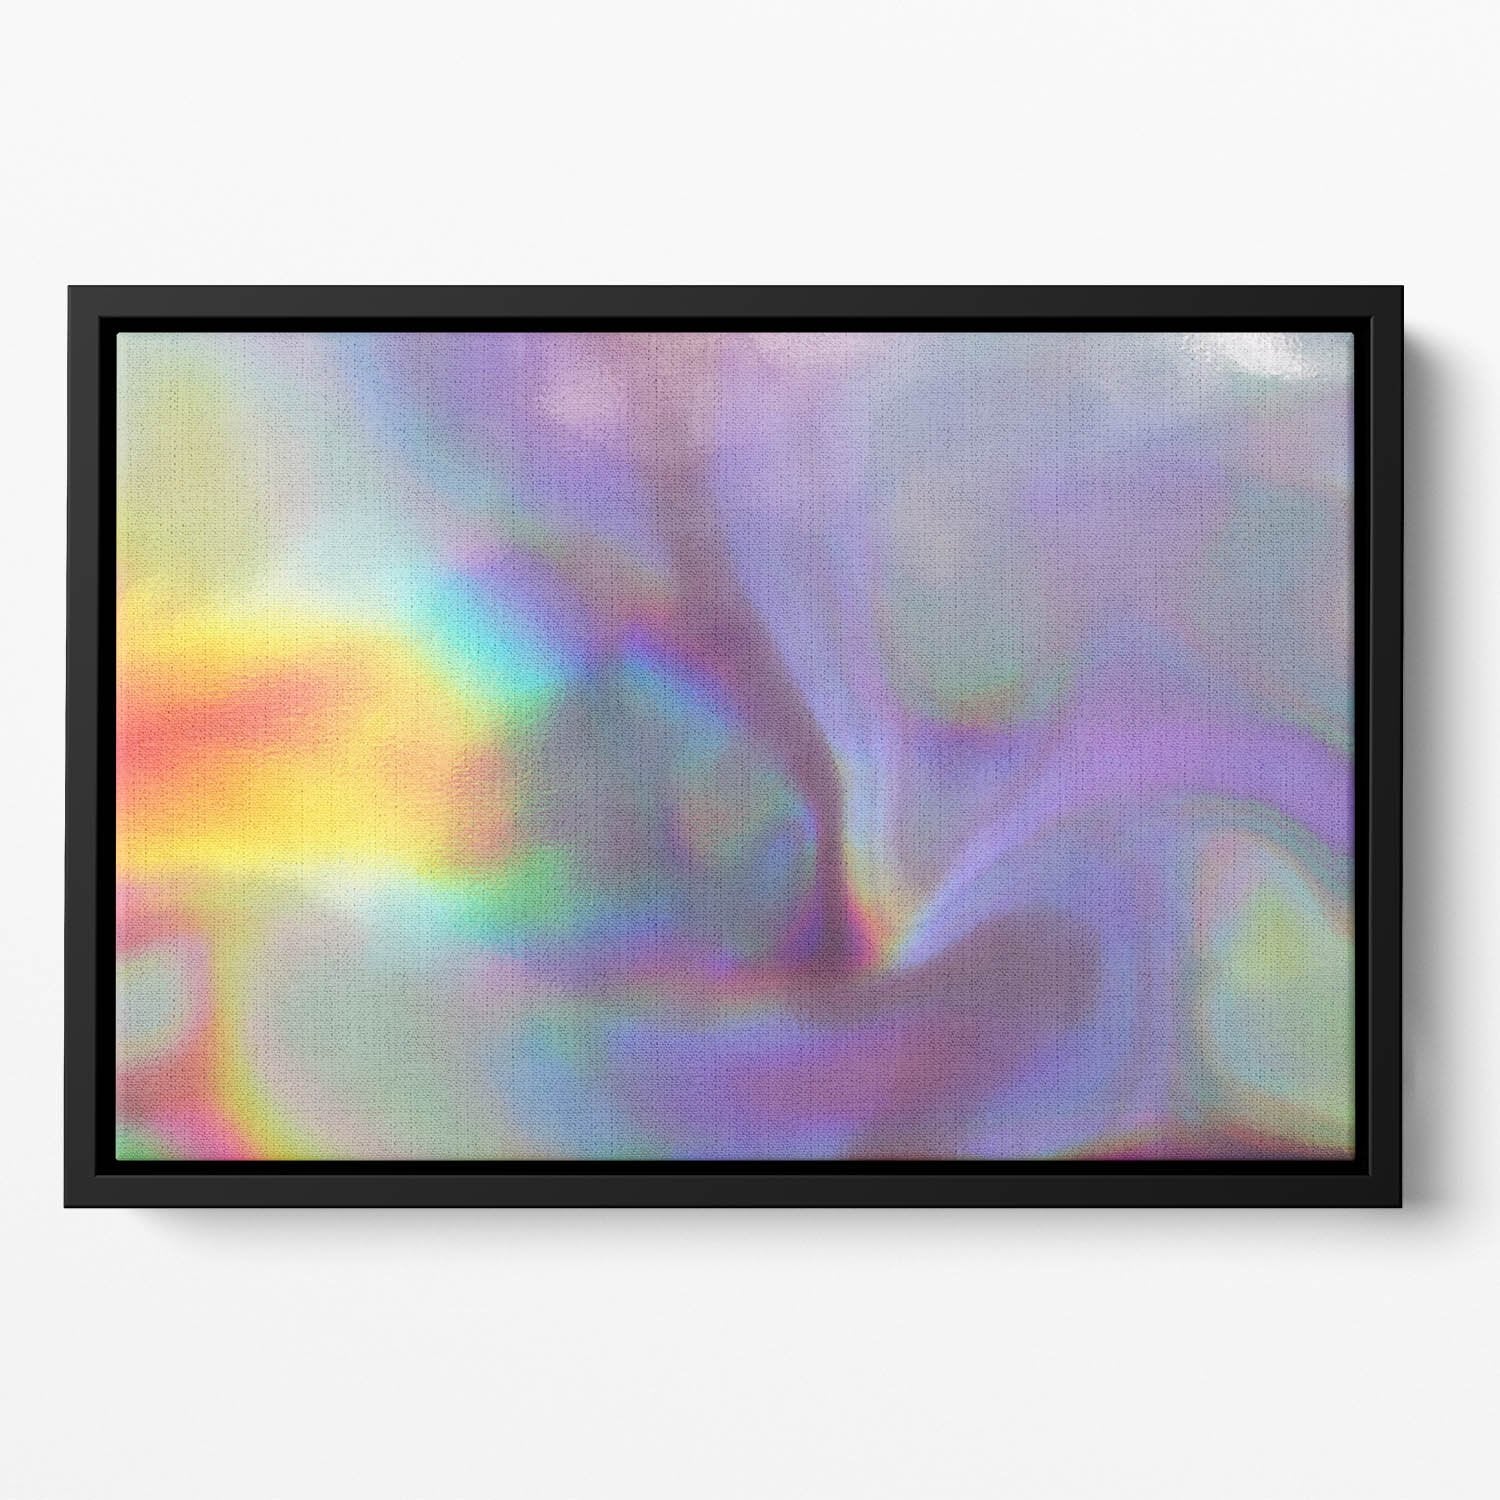 Holographic texture 2 Floating Framed Canvas